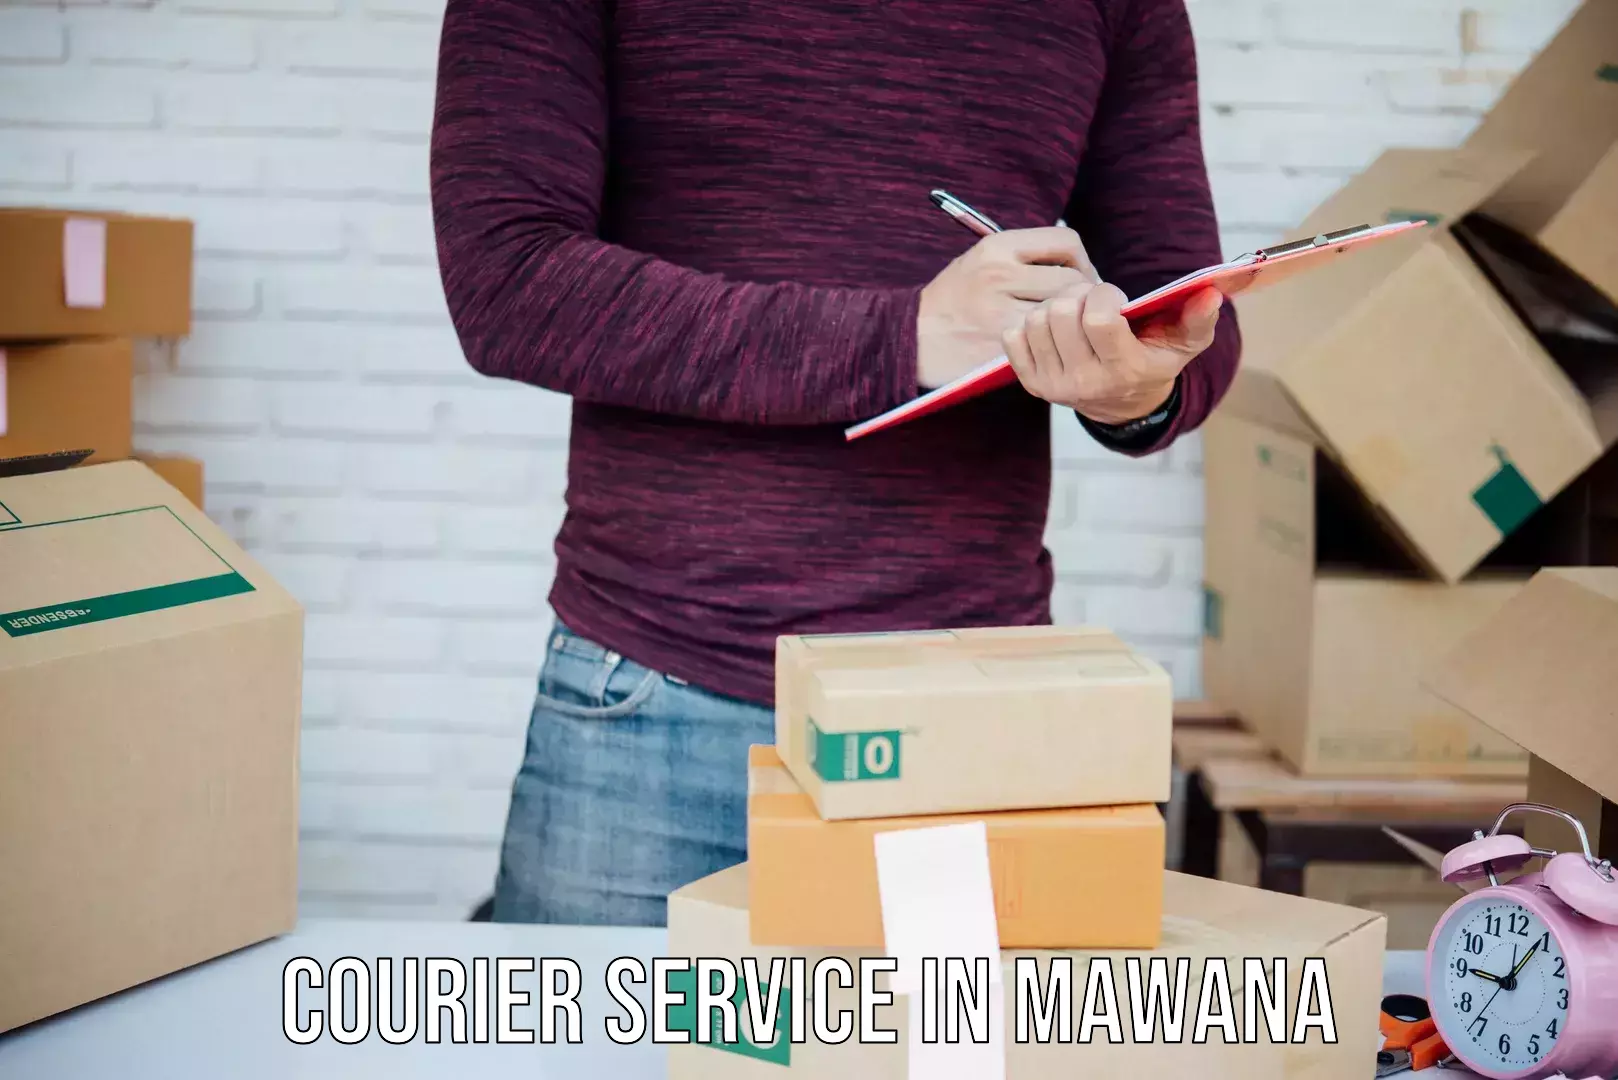 Customer-focused courier in Mawana